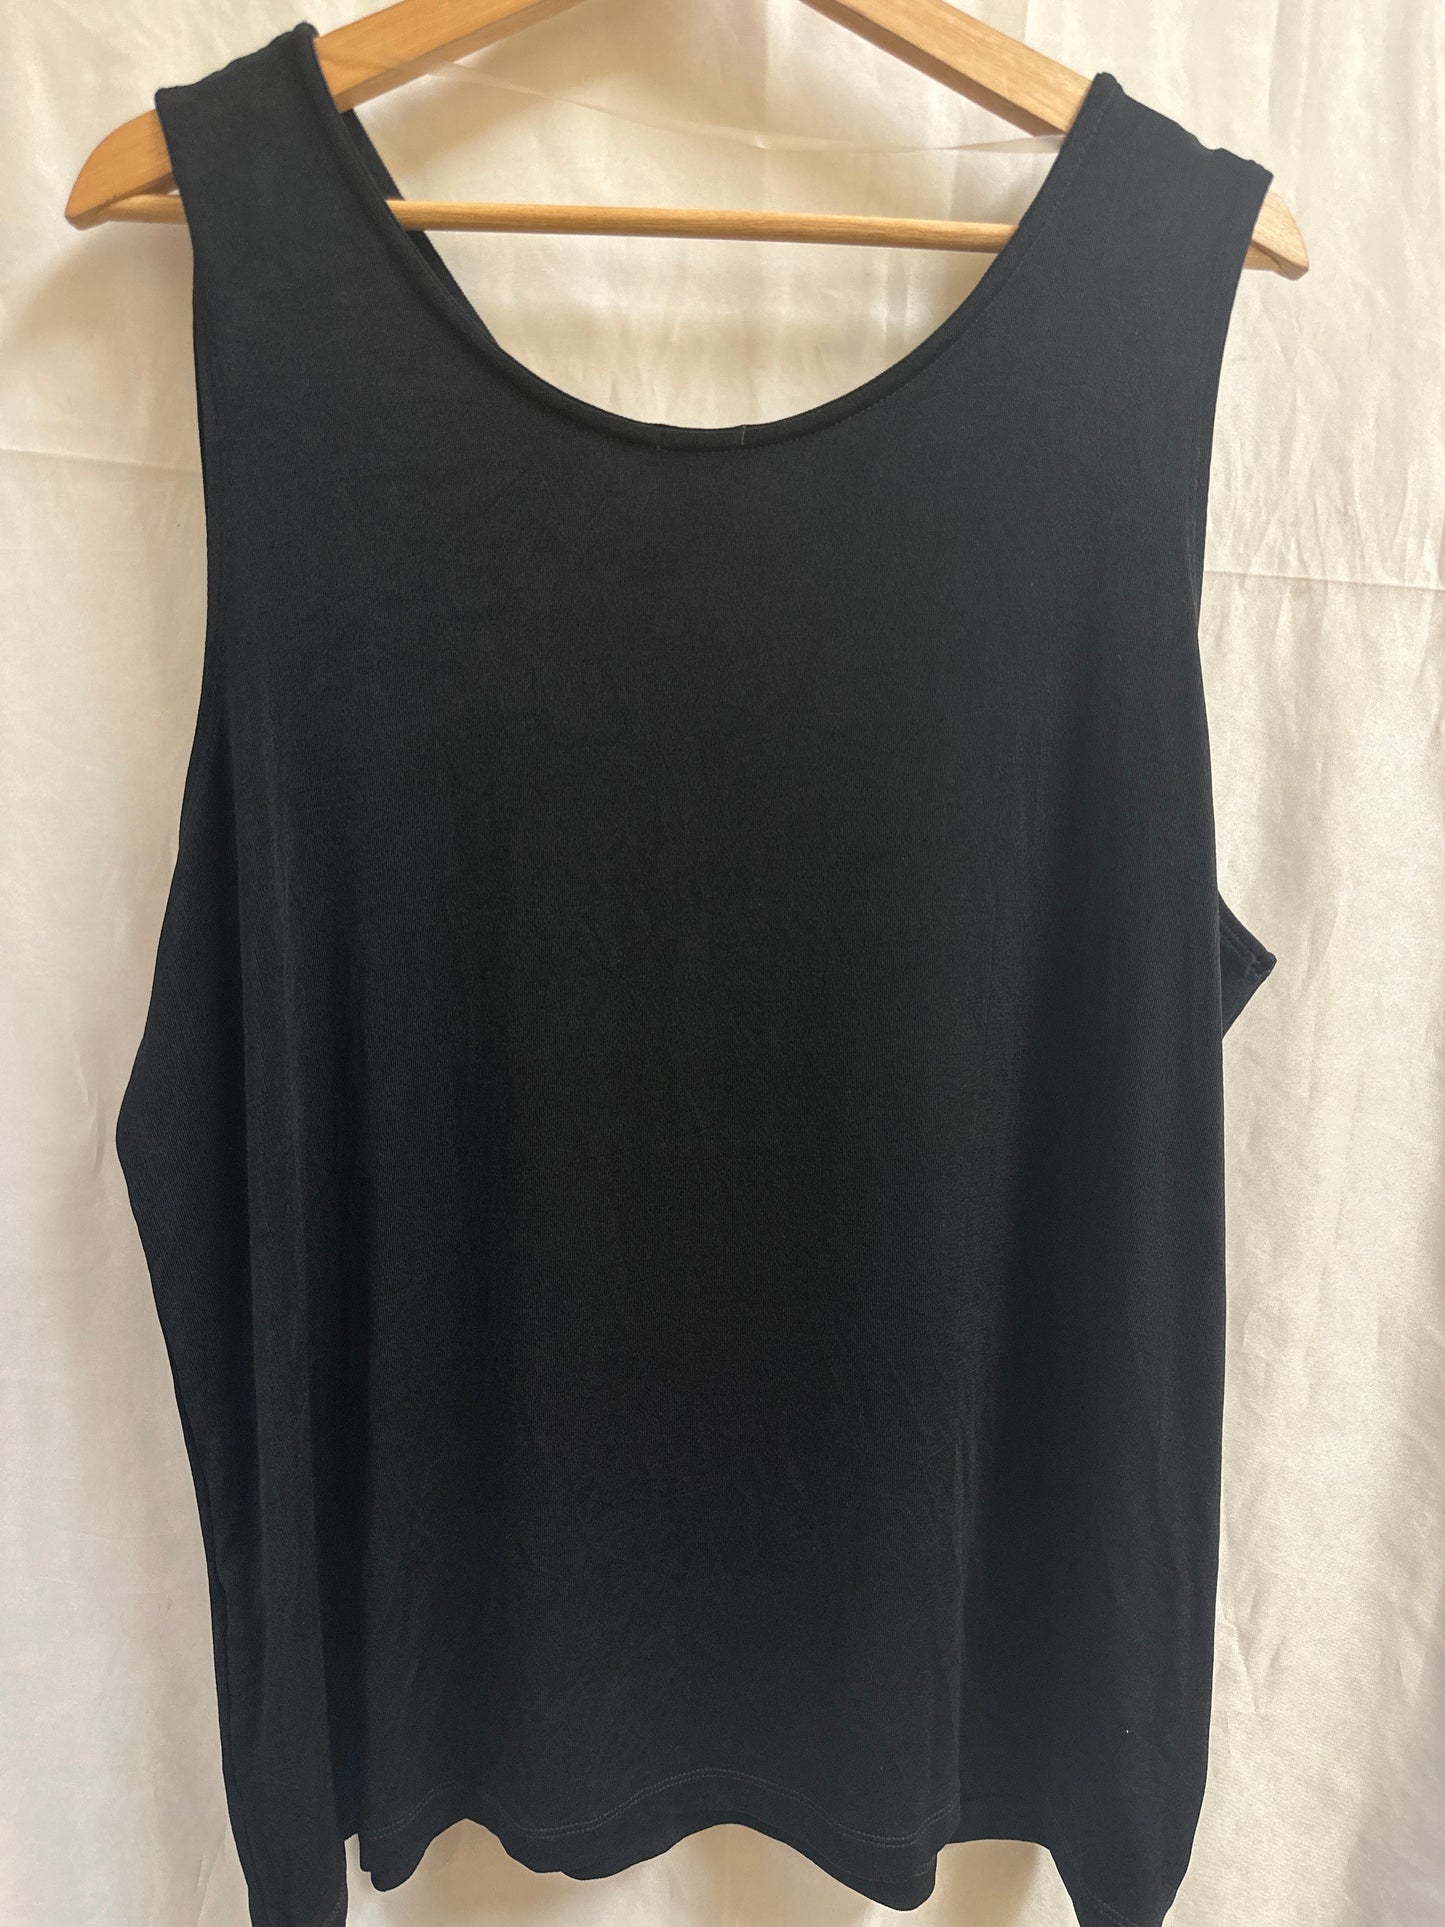 Top Sleeveless Basic By Chicos  Size: 1x